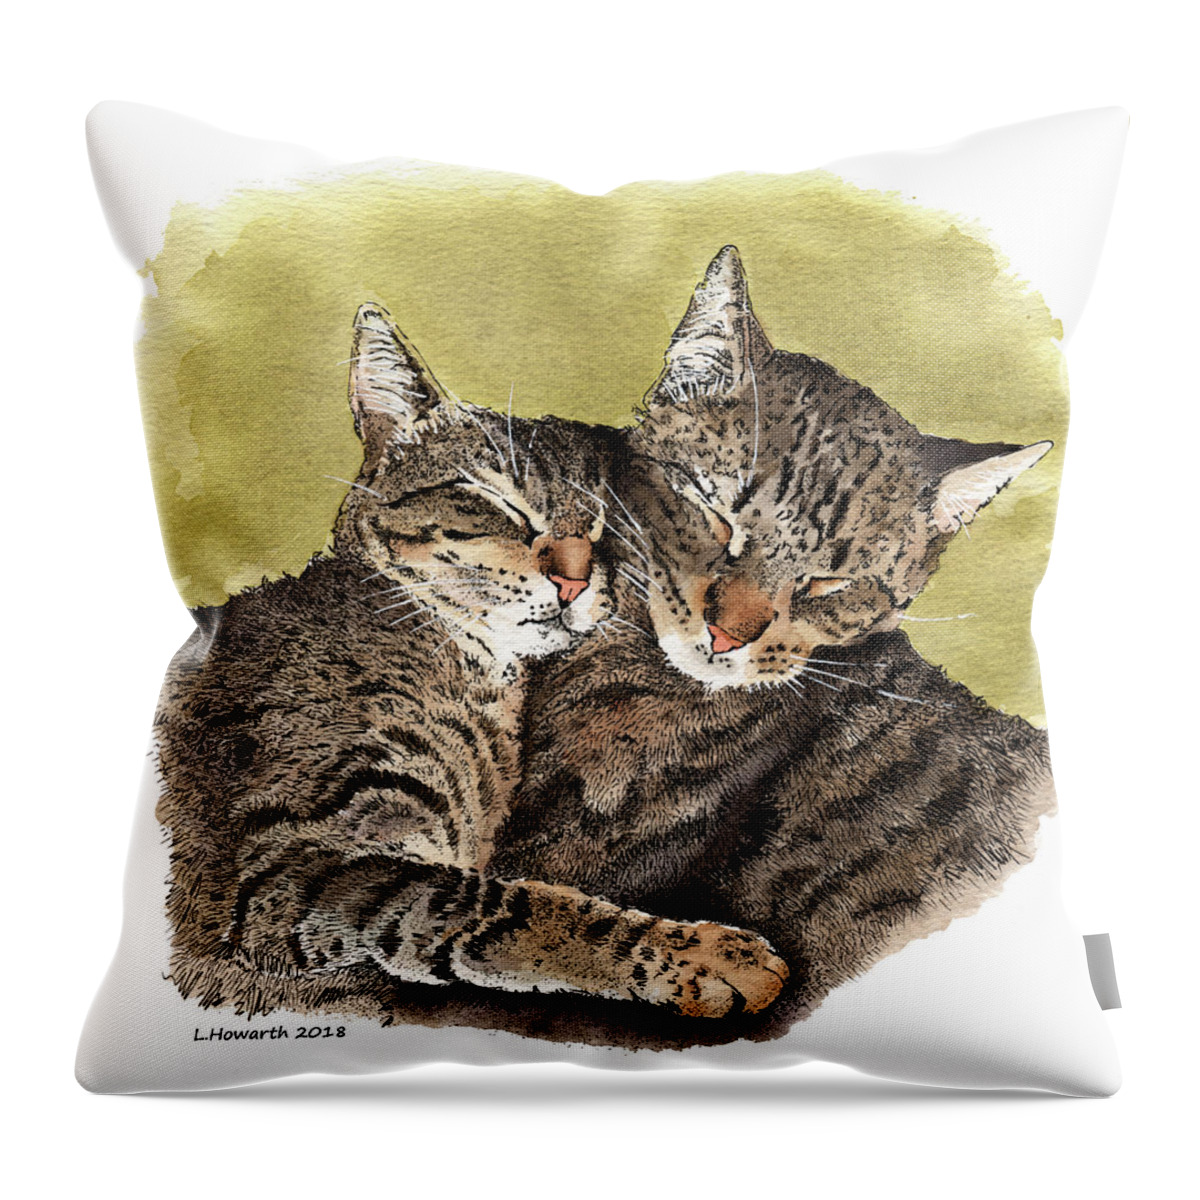 Cats Throw Pillow featuring the painting Snuggle Buddies by Louise Howarth